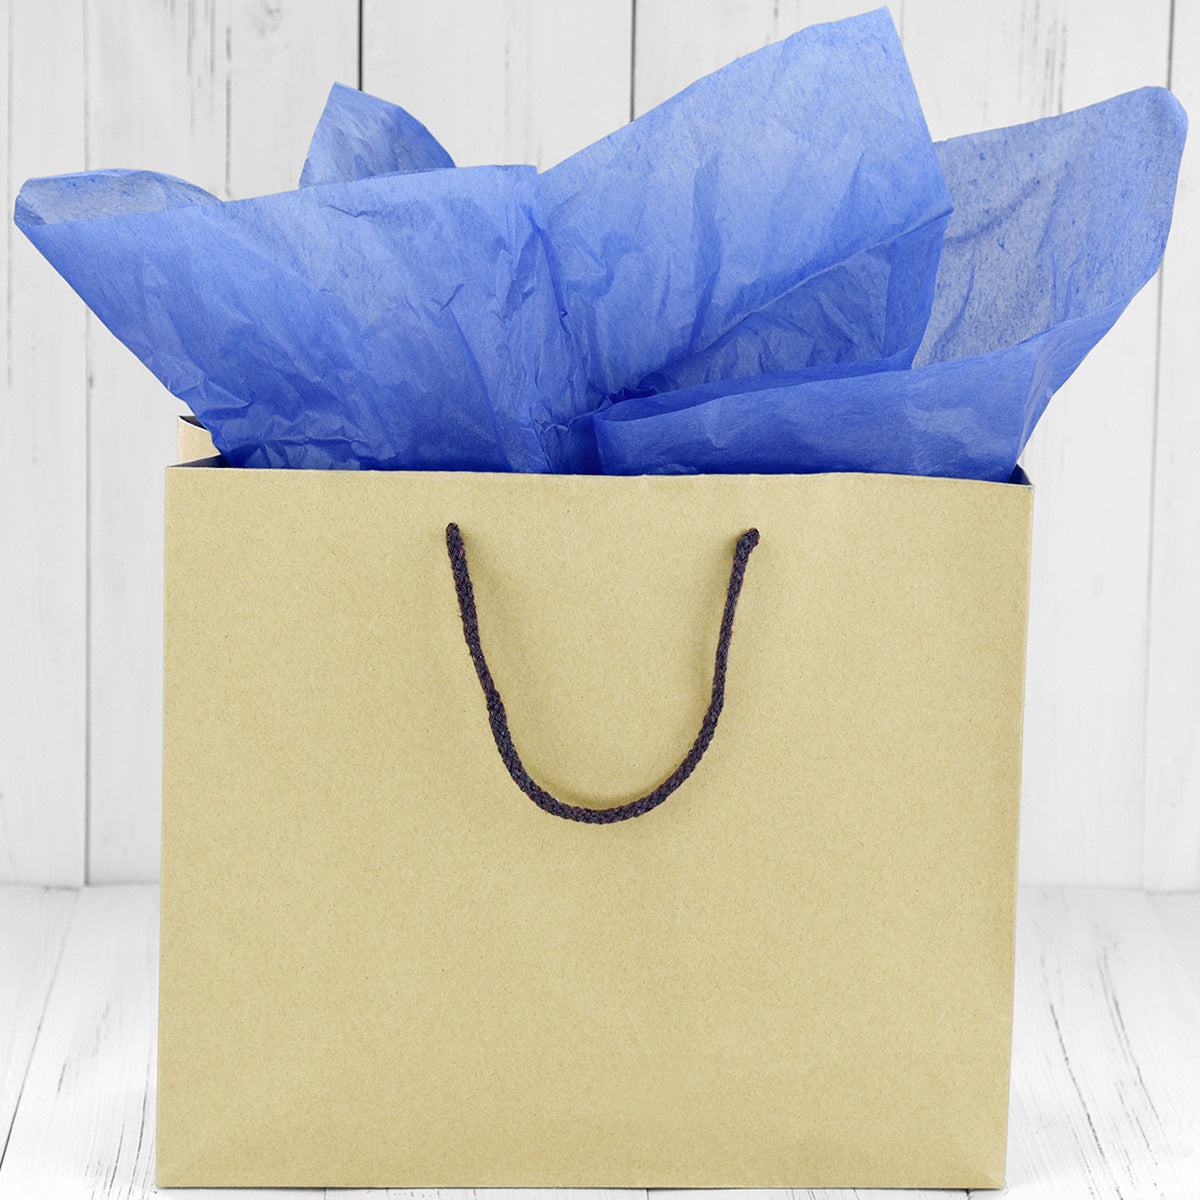 50 Sheets Dark Blue Wrapping Tissue Paper